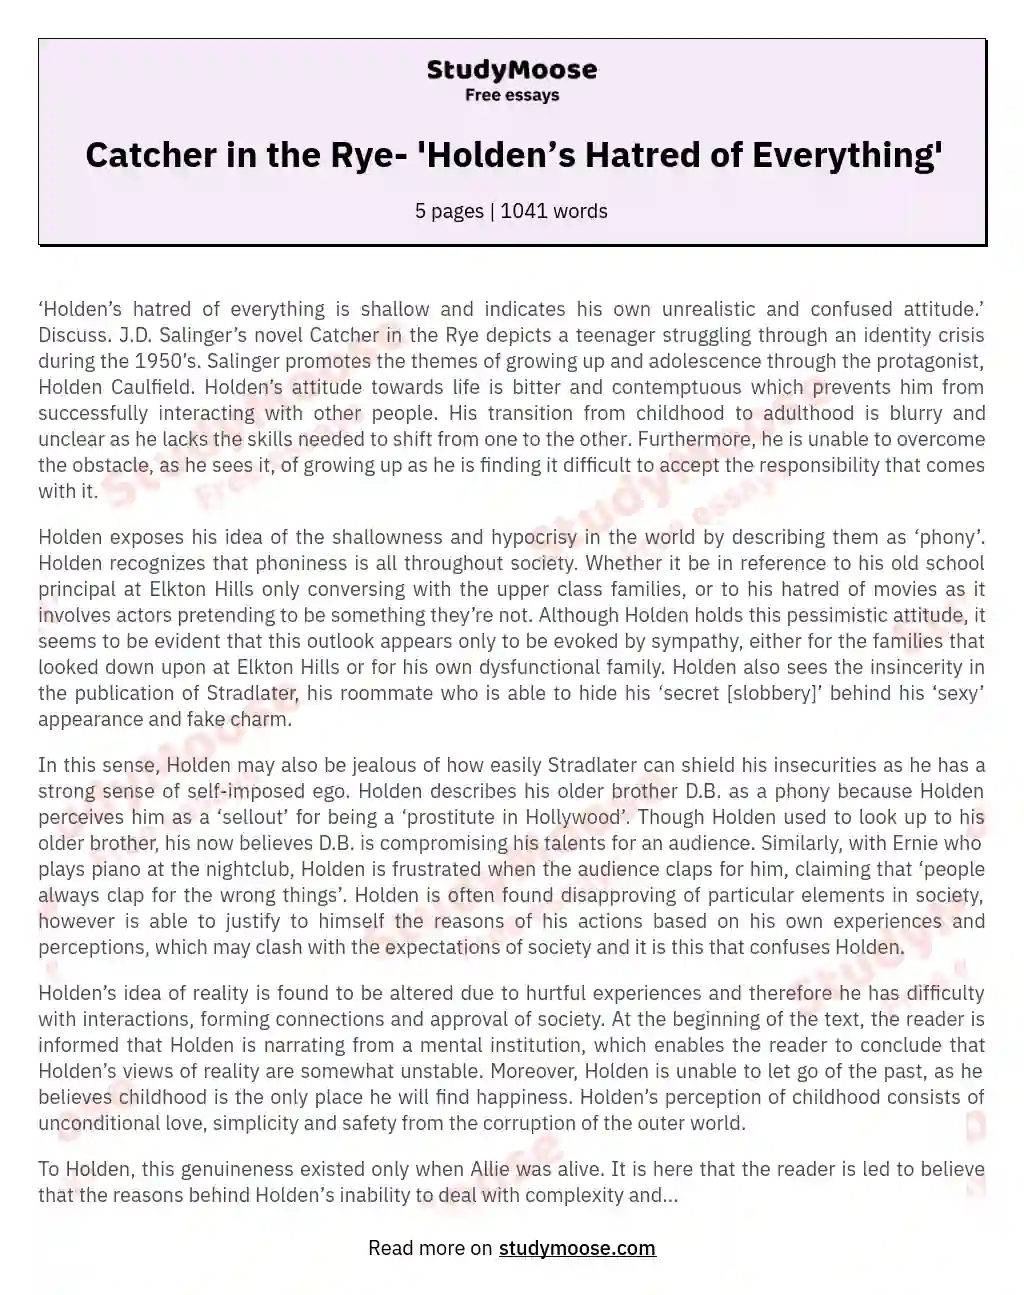 Catcher in the Rye- 'Holden’s Hatred of Everything'